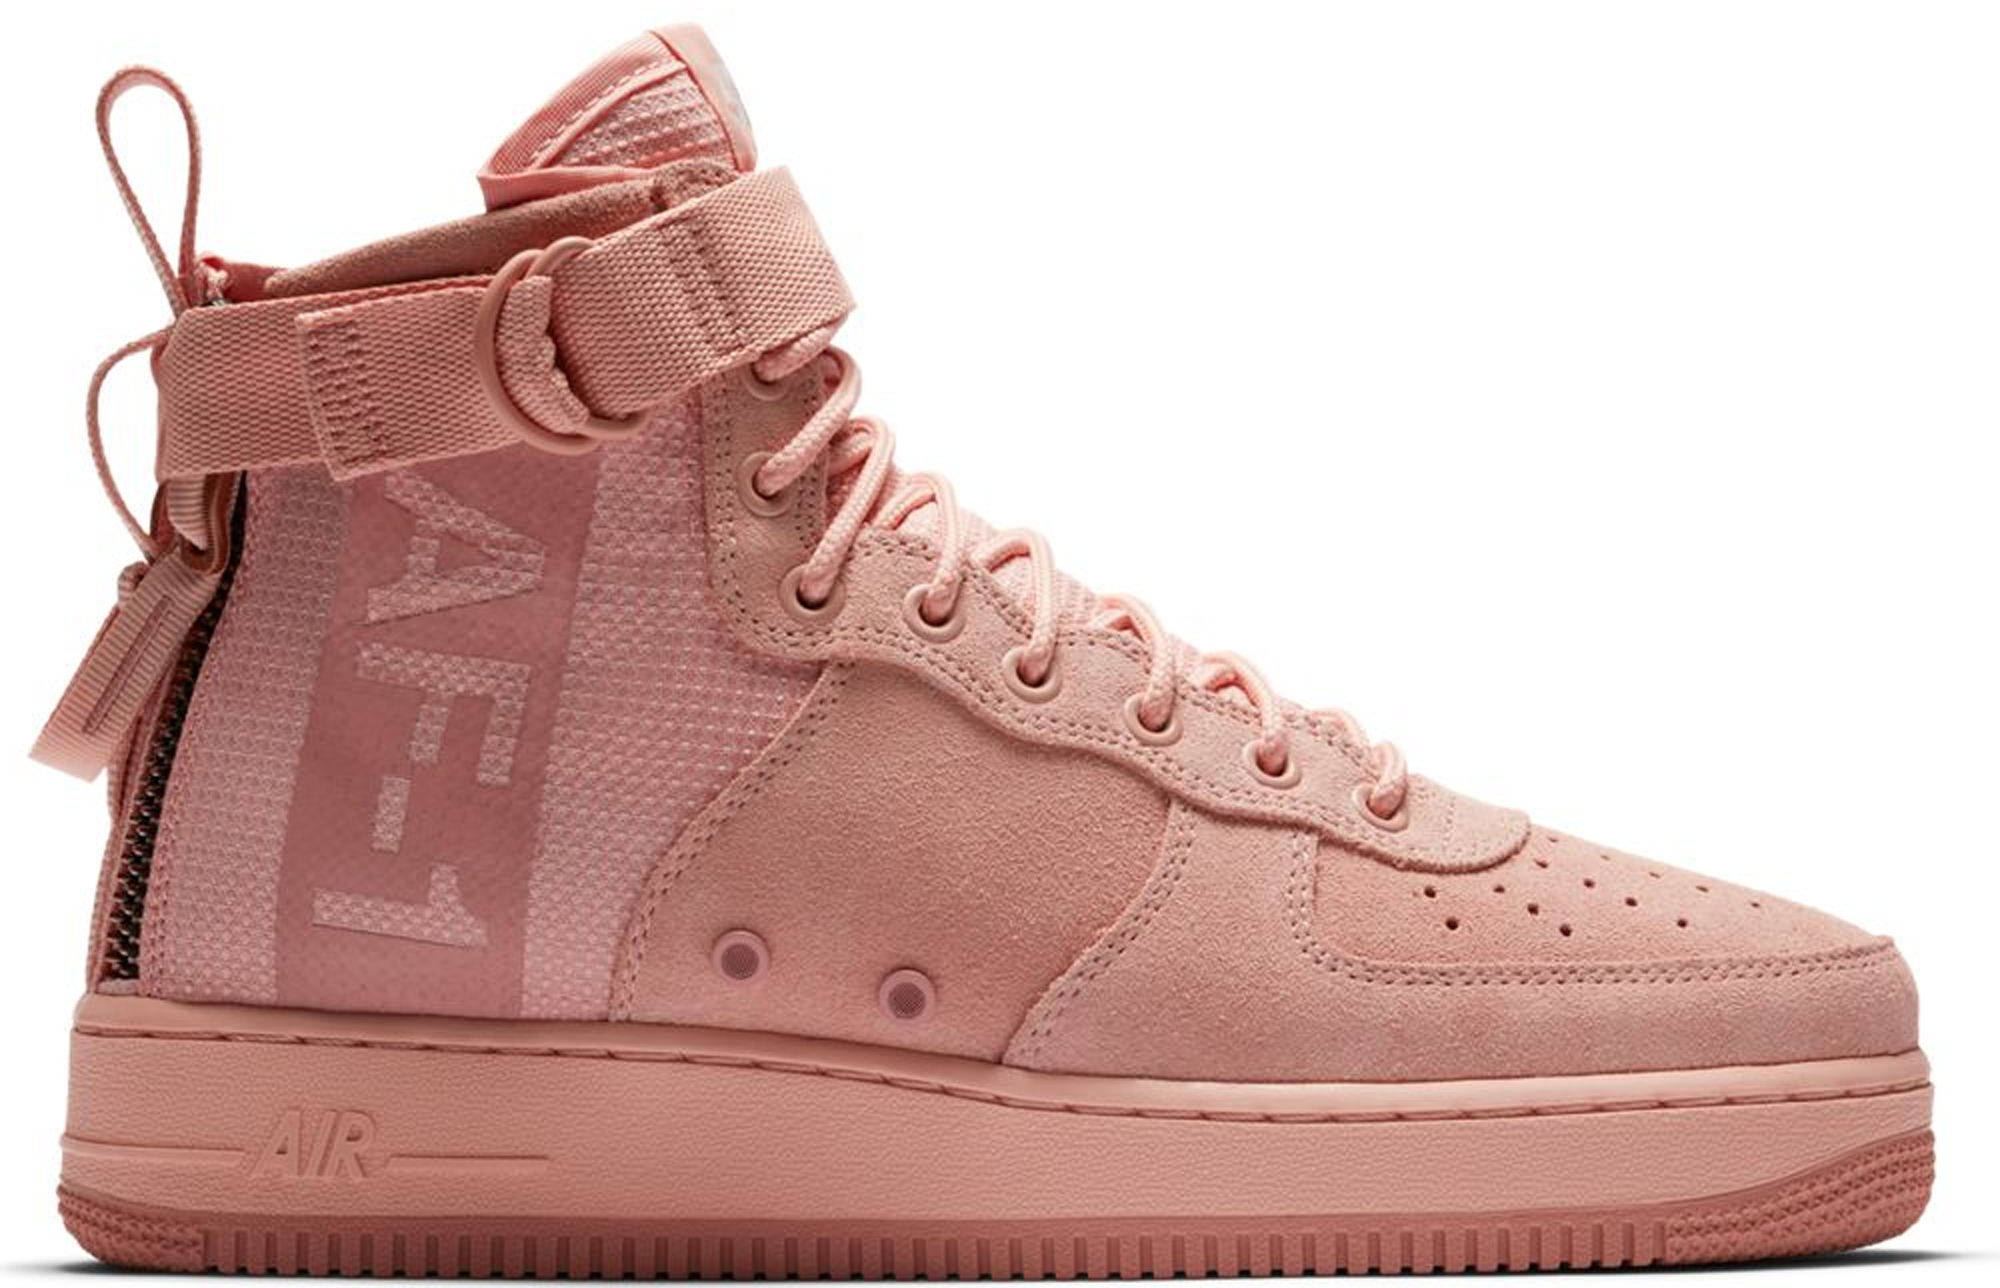 Nike SF Air Force 1 Mid Coral Stardust 